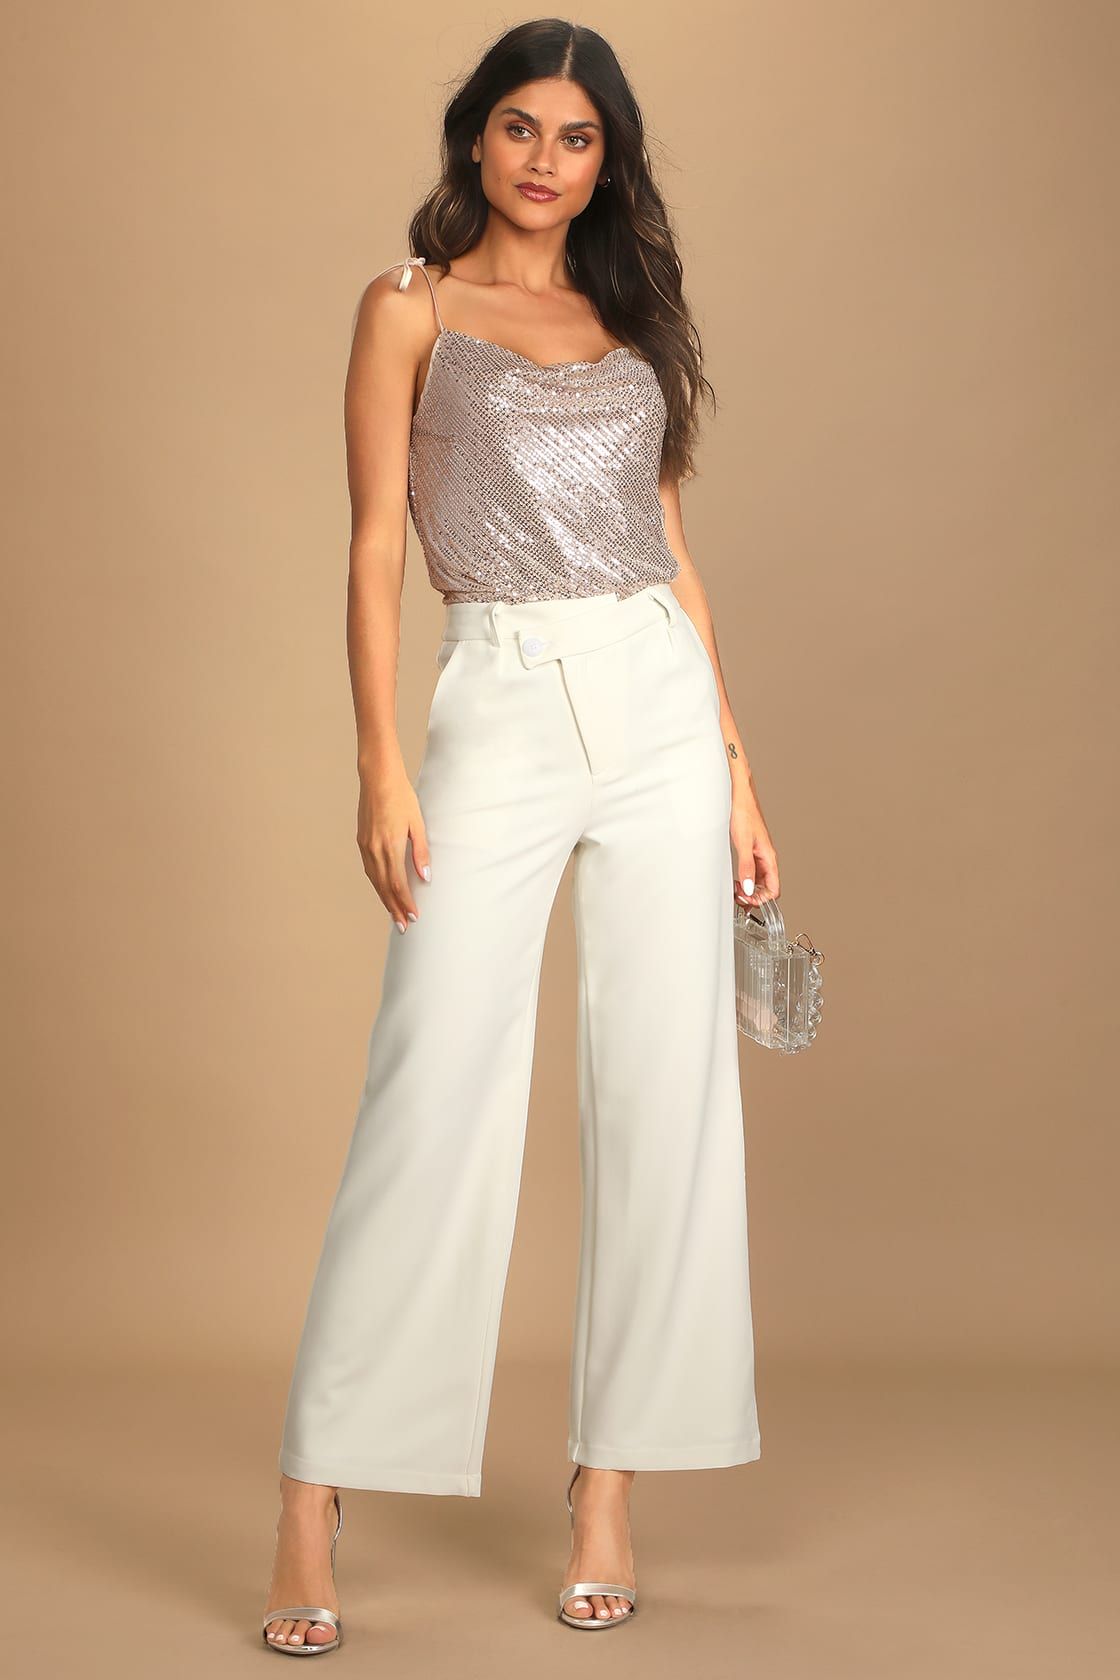 Party Pick Champagne Sequin Tie-Strap Cami Top | Lulus (US)